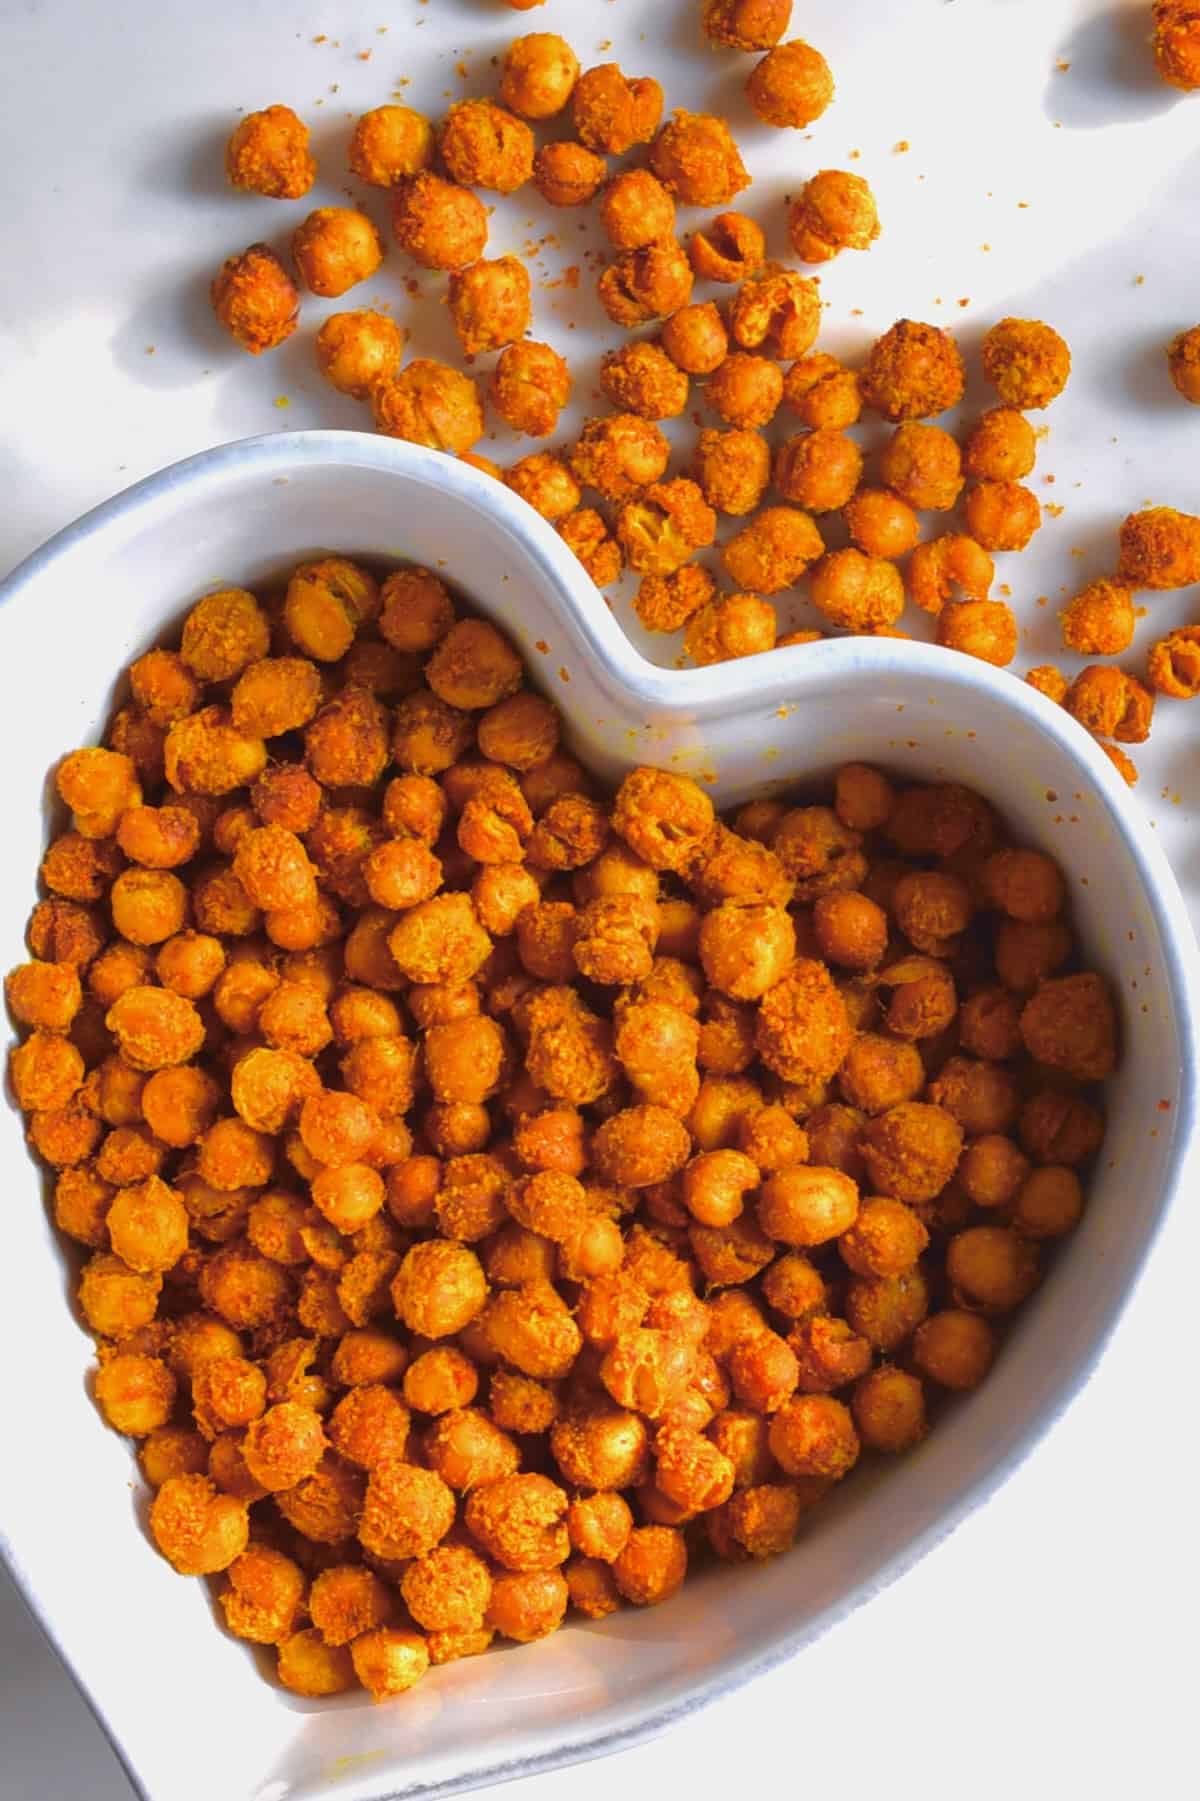 A bowl with homemade roasted chickpeas